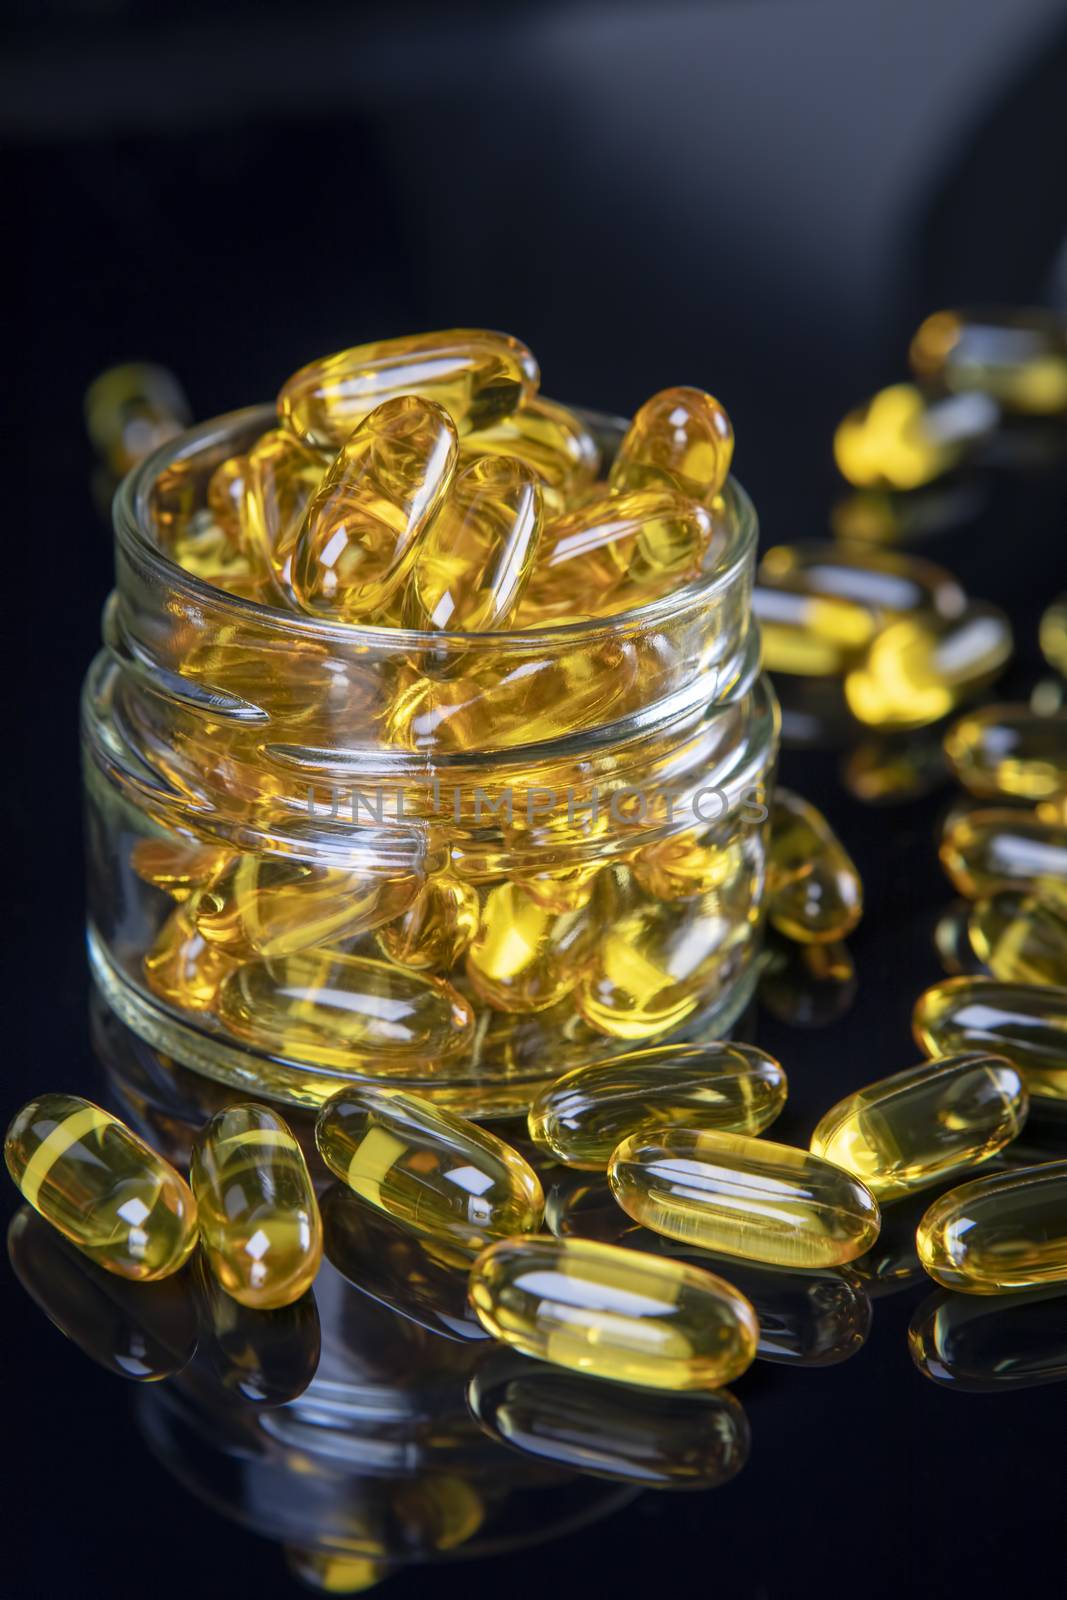 Omega fish oil softgels dietary supplement in jar. Healthy life and heart health concept.